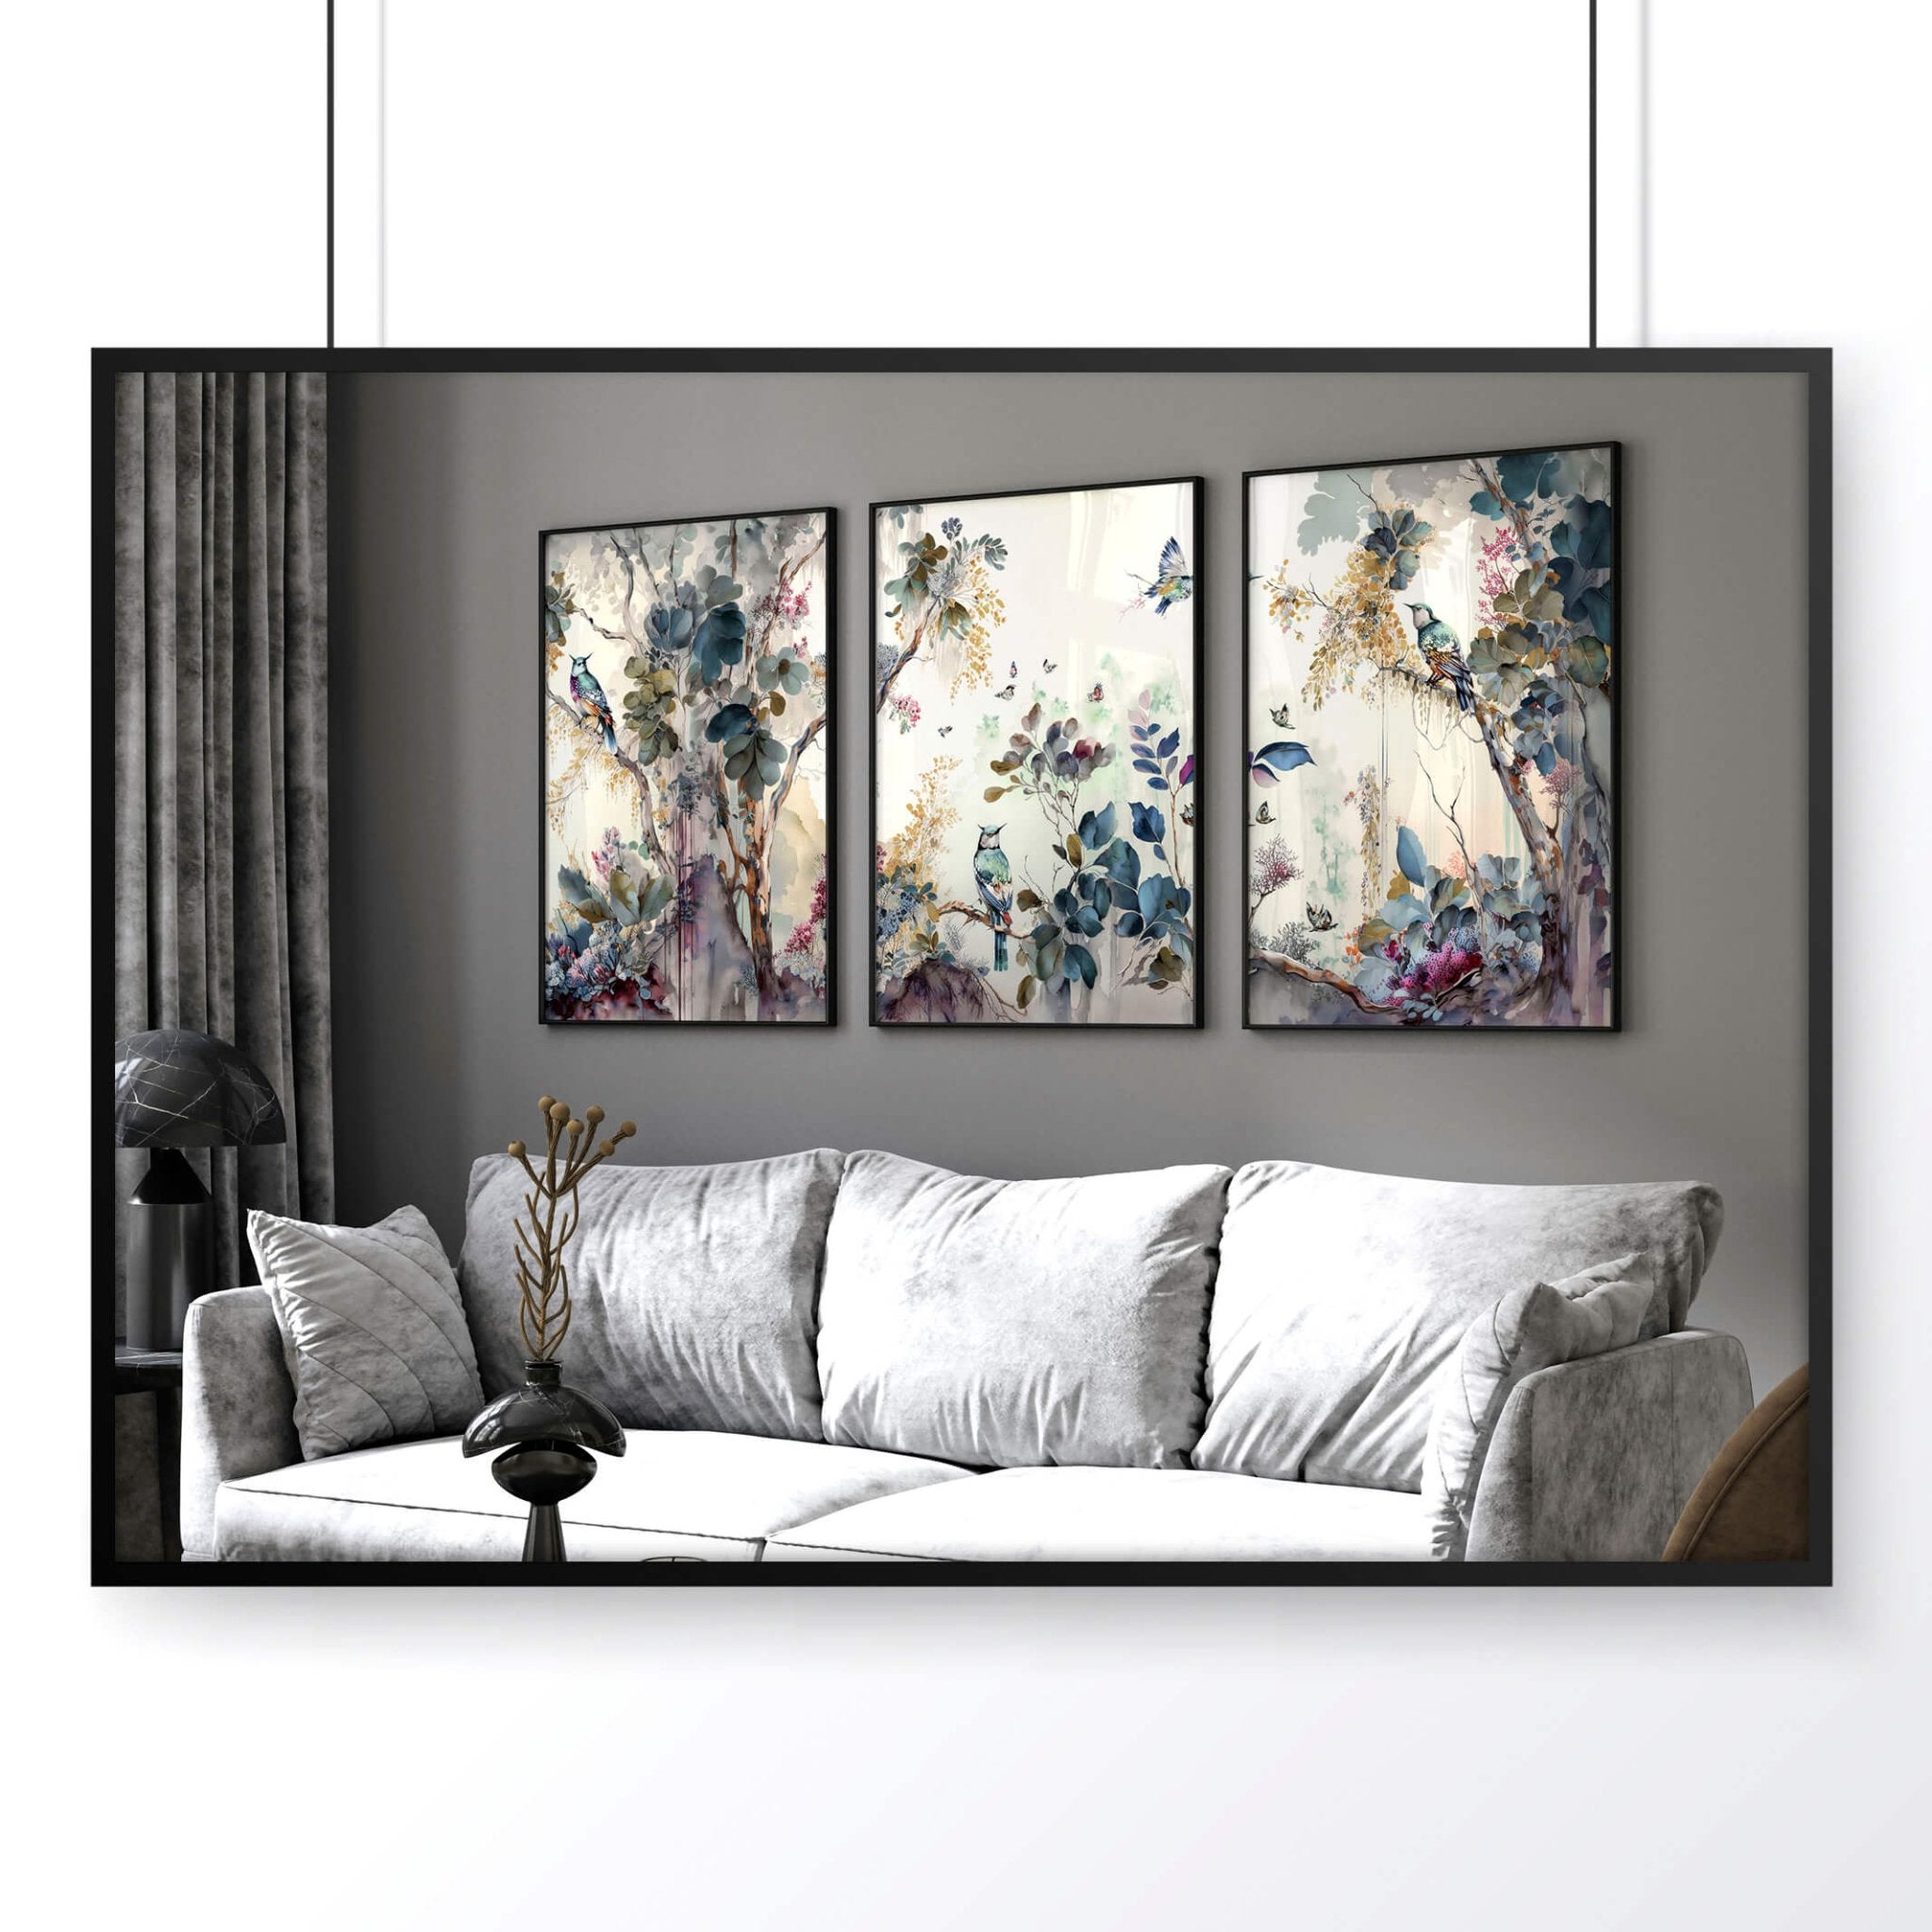 Chinoiserie wall decor - About Wall Art